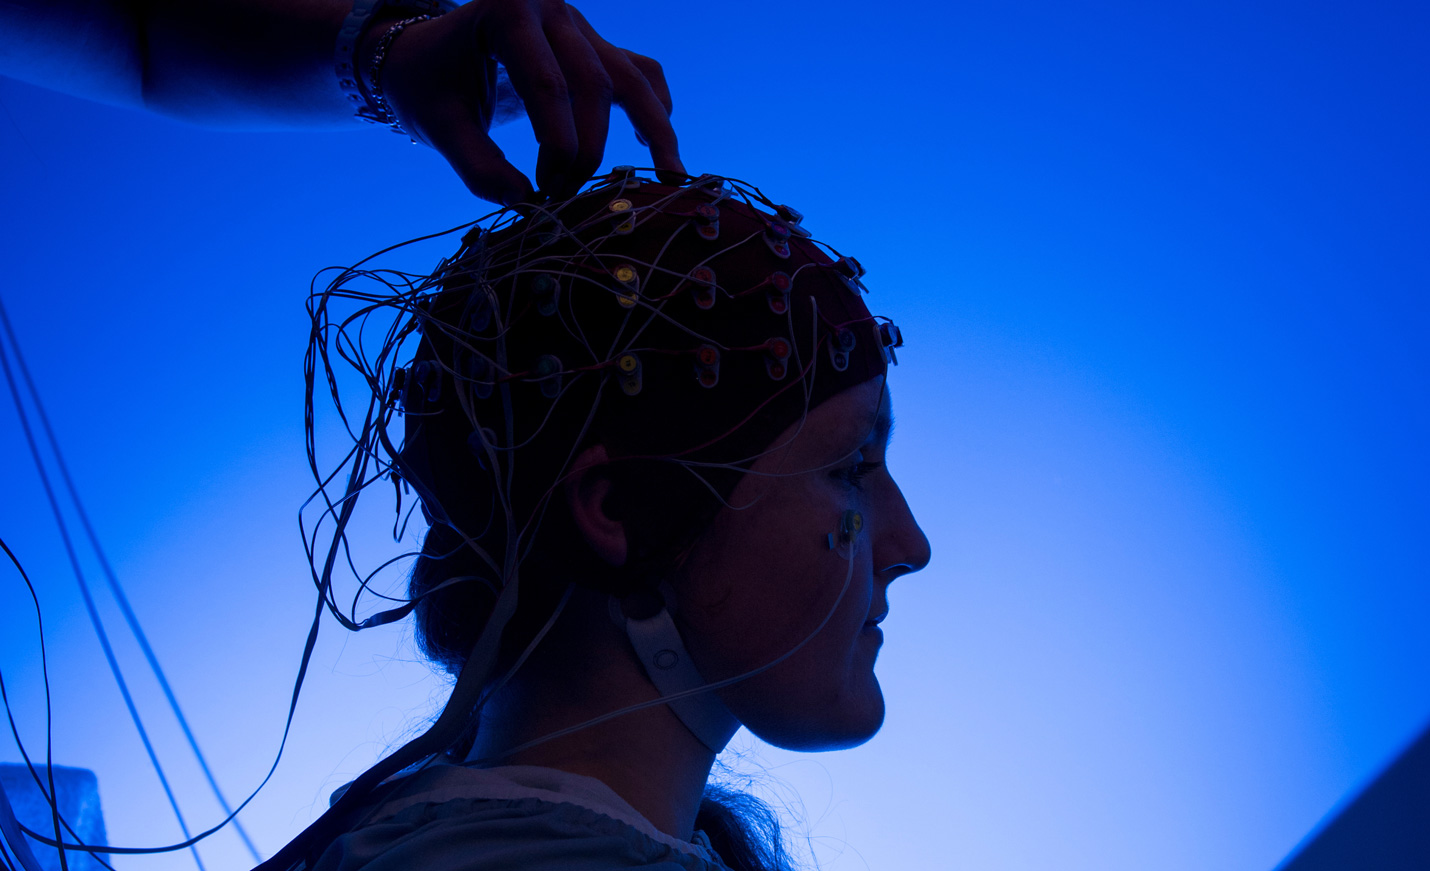 A neck-up profile photo of someone with dozens of electrodes and wires attached to their scalp